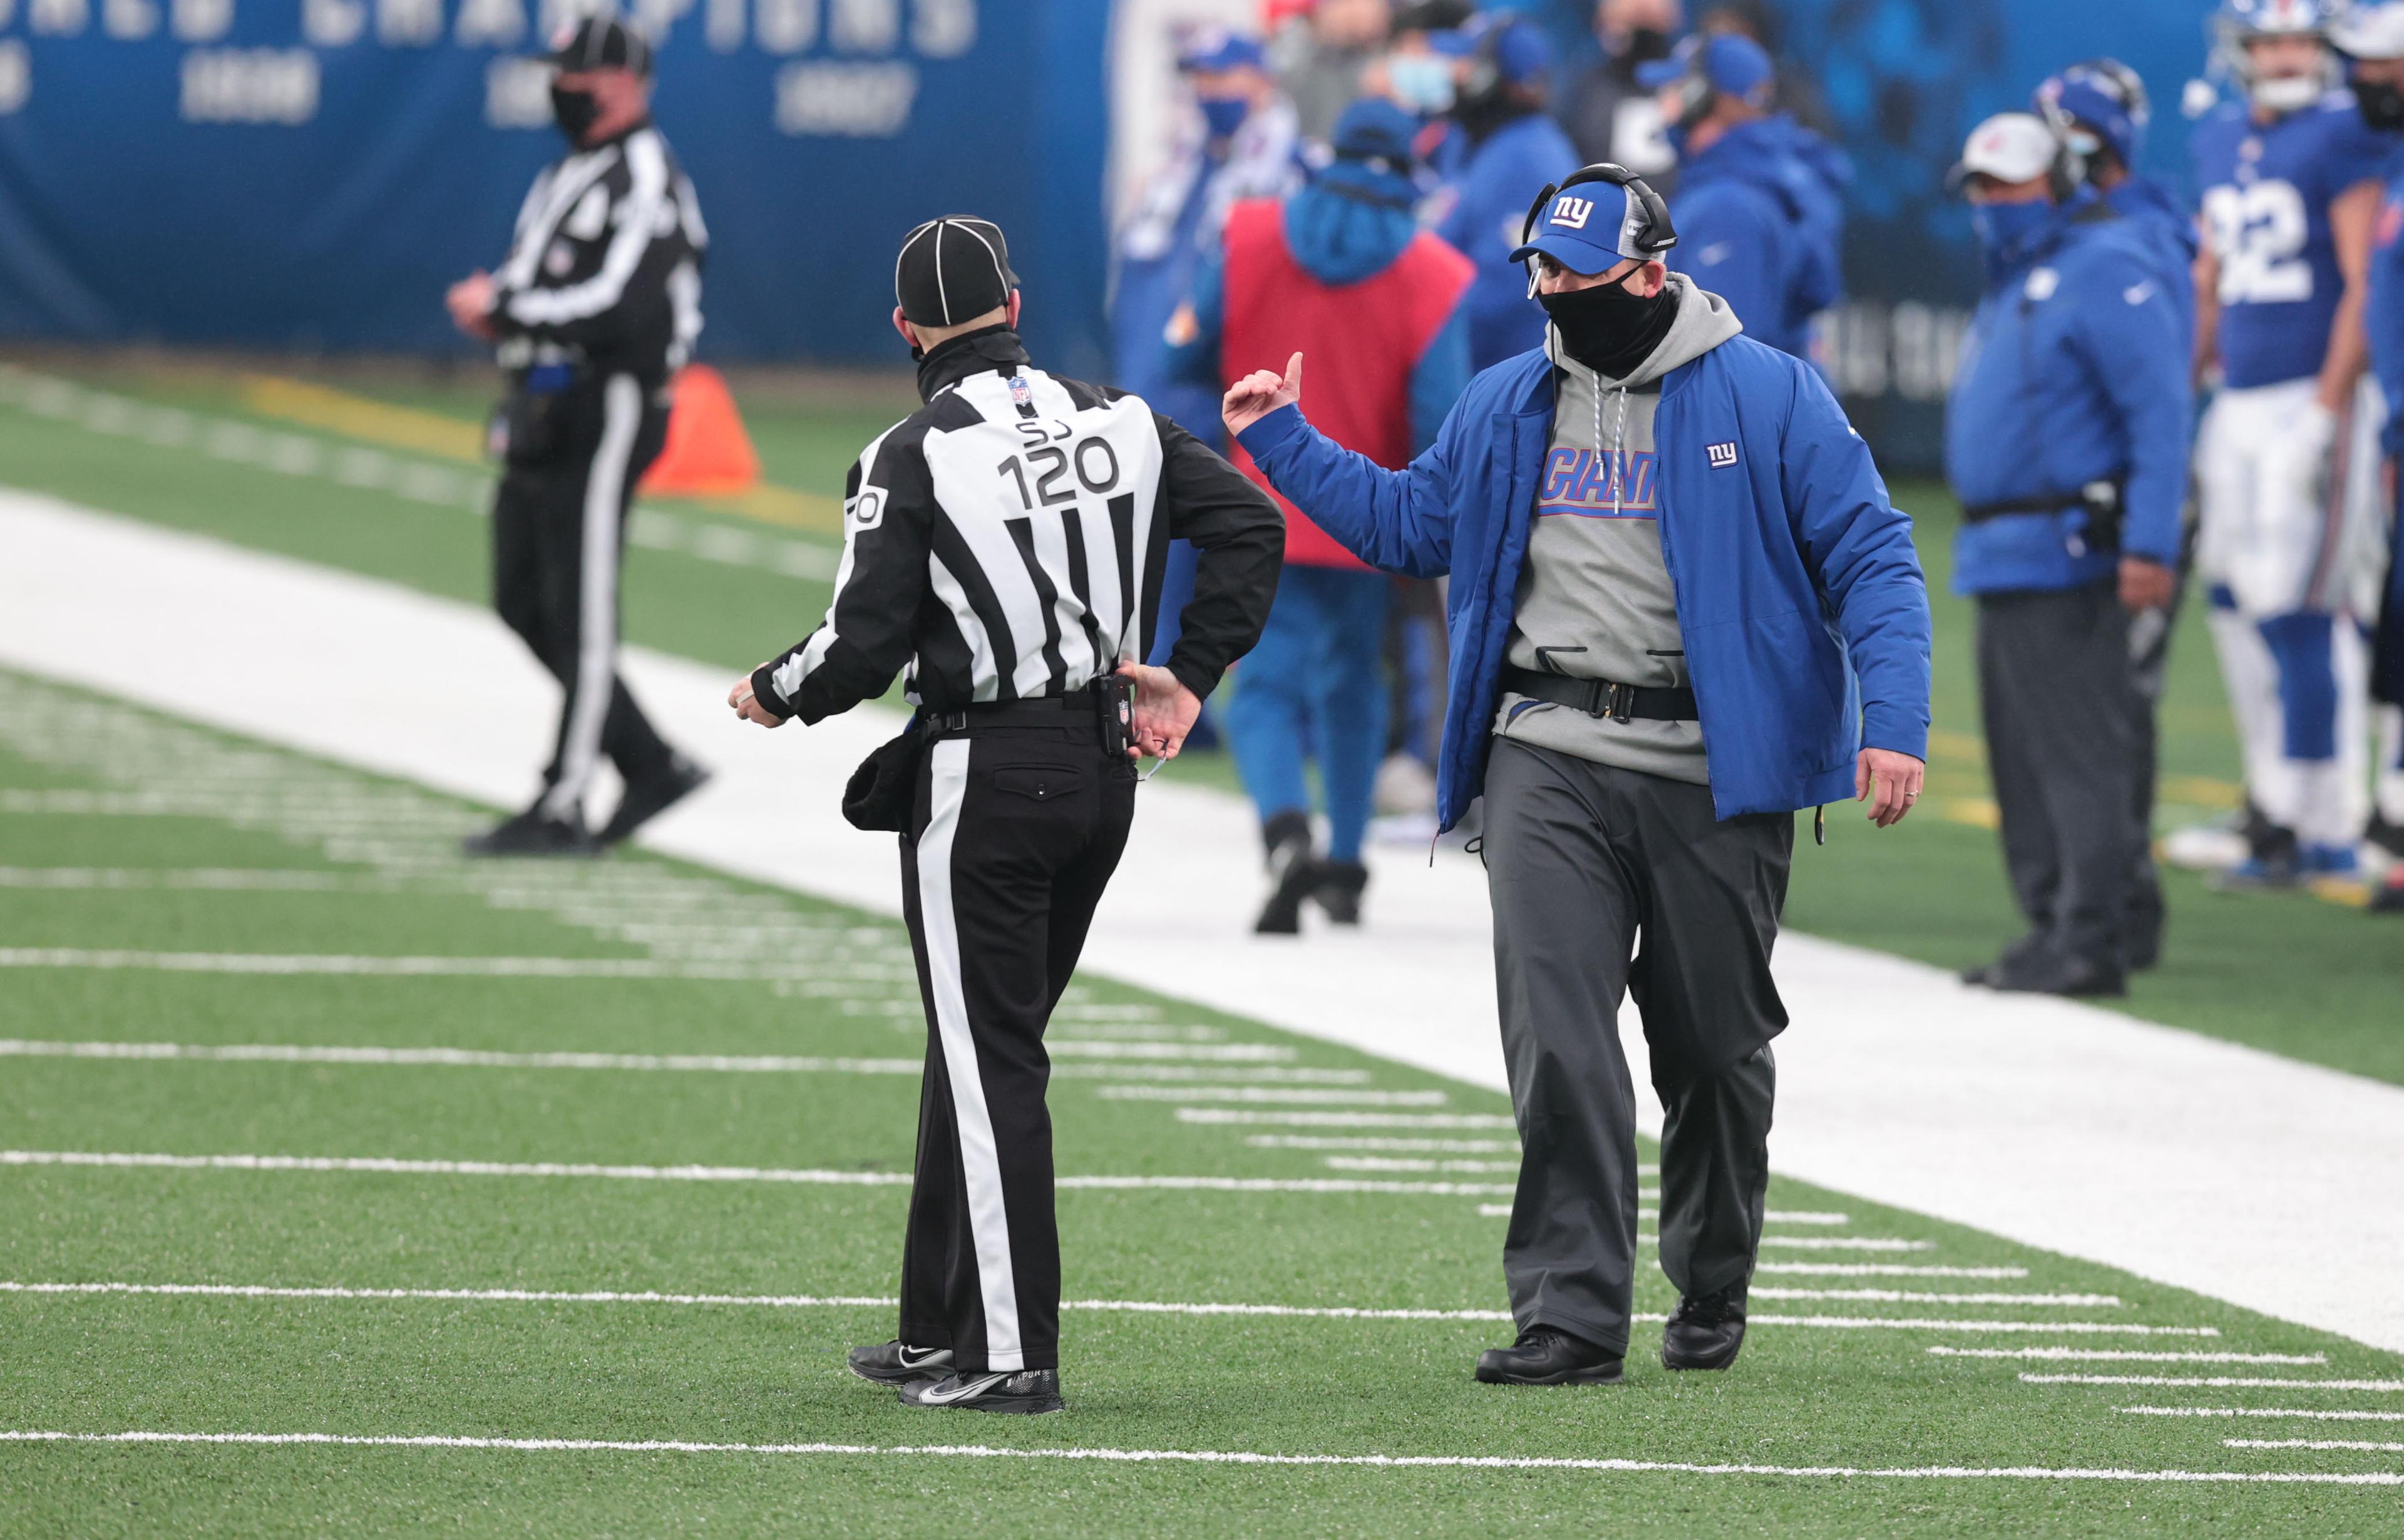 Jan 3, 2021; East Rutherford, NJ, USA; New York Giants head coach Joe Judge talks with the side judge against the Dallas Cowboys in the second half at MetLife Stadium. Mandatory Credit: Vincent Carchietta-USA TODAY Sports / © Vincent Carchietta-USA TODAY Sports